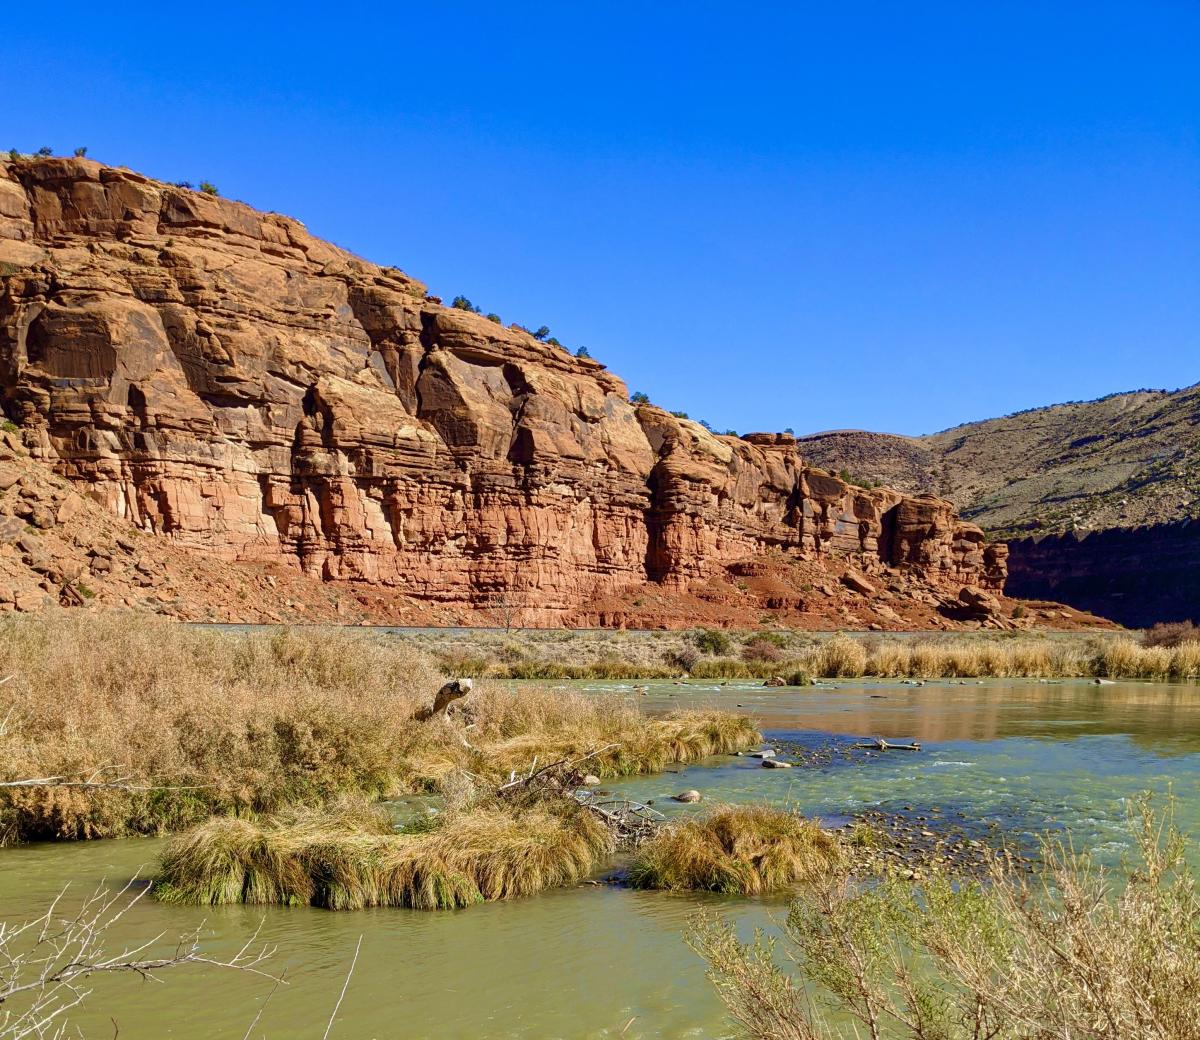 Gunnison River flowing through a red rock canyon along the Big Dominguez Canyon Trail in Dominguez-Escalante National Conservation Area.